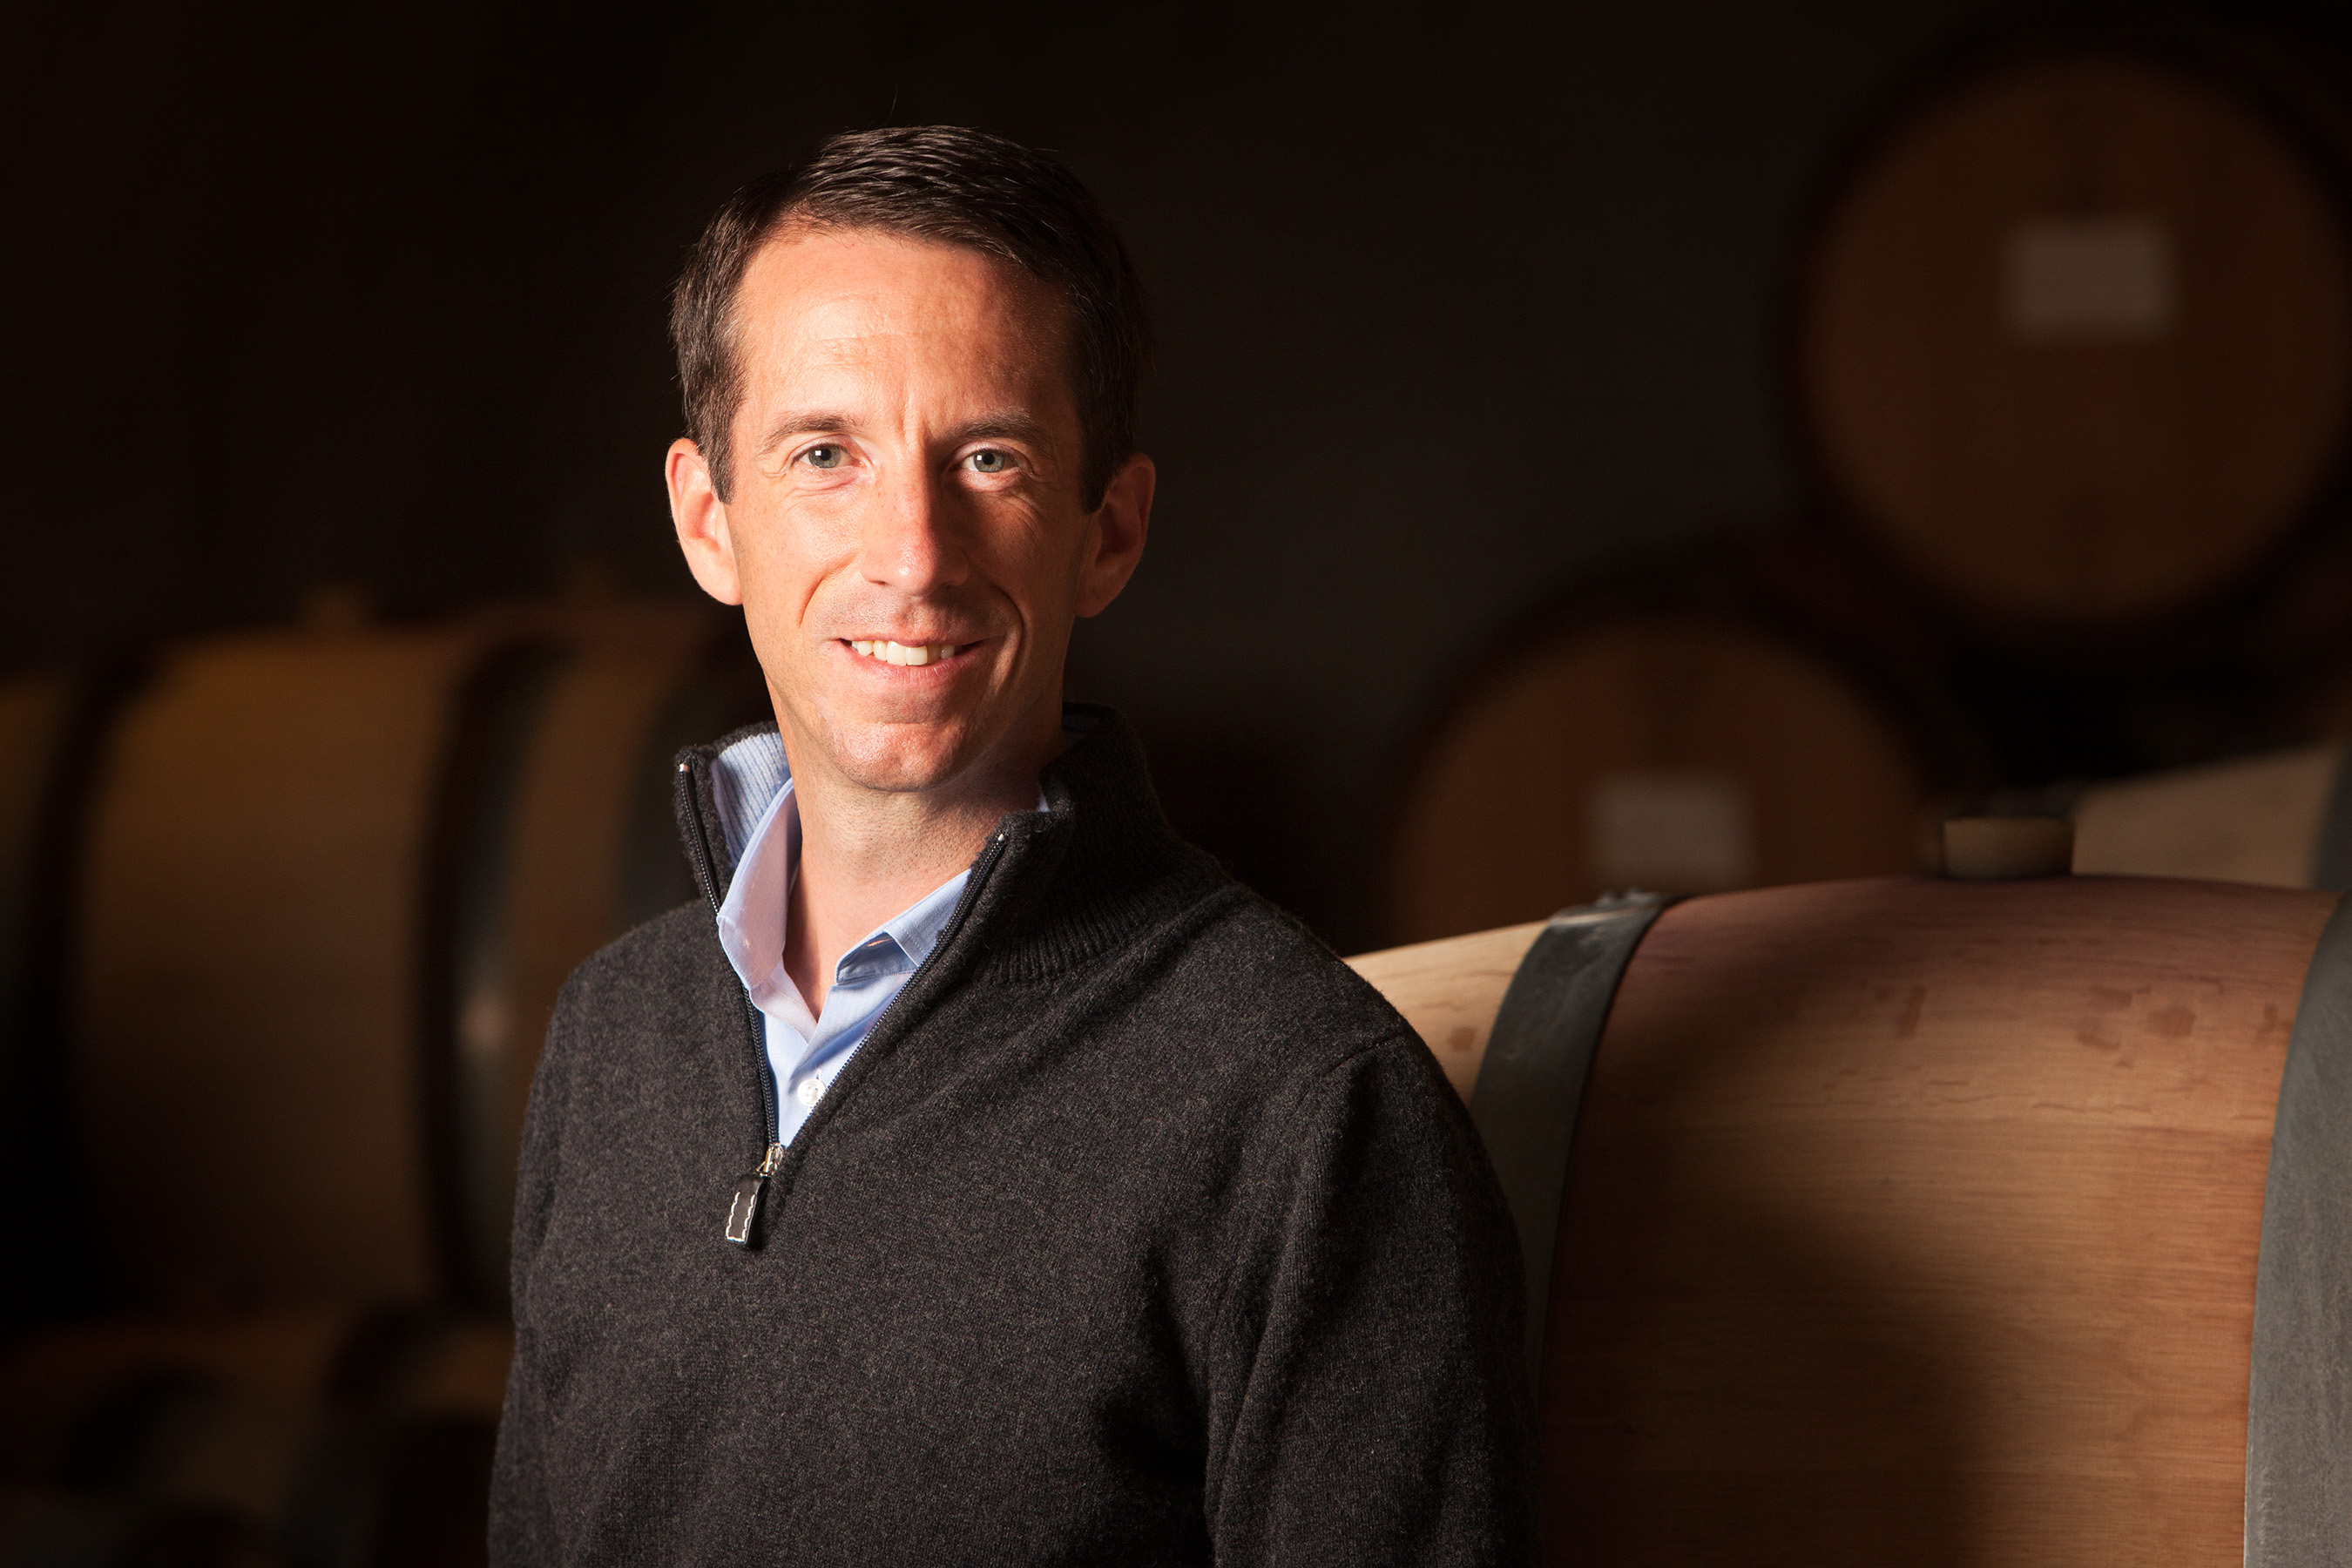 Chris Mazepink, Winemaker General Manager of Archery Summit Winery